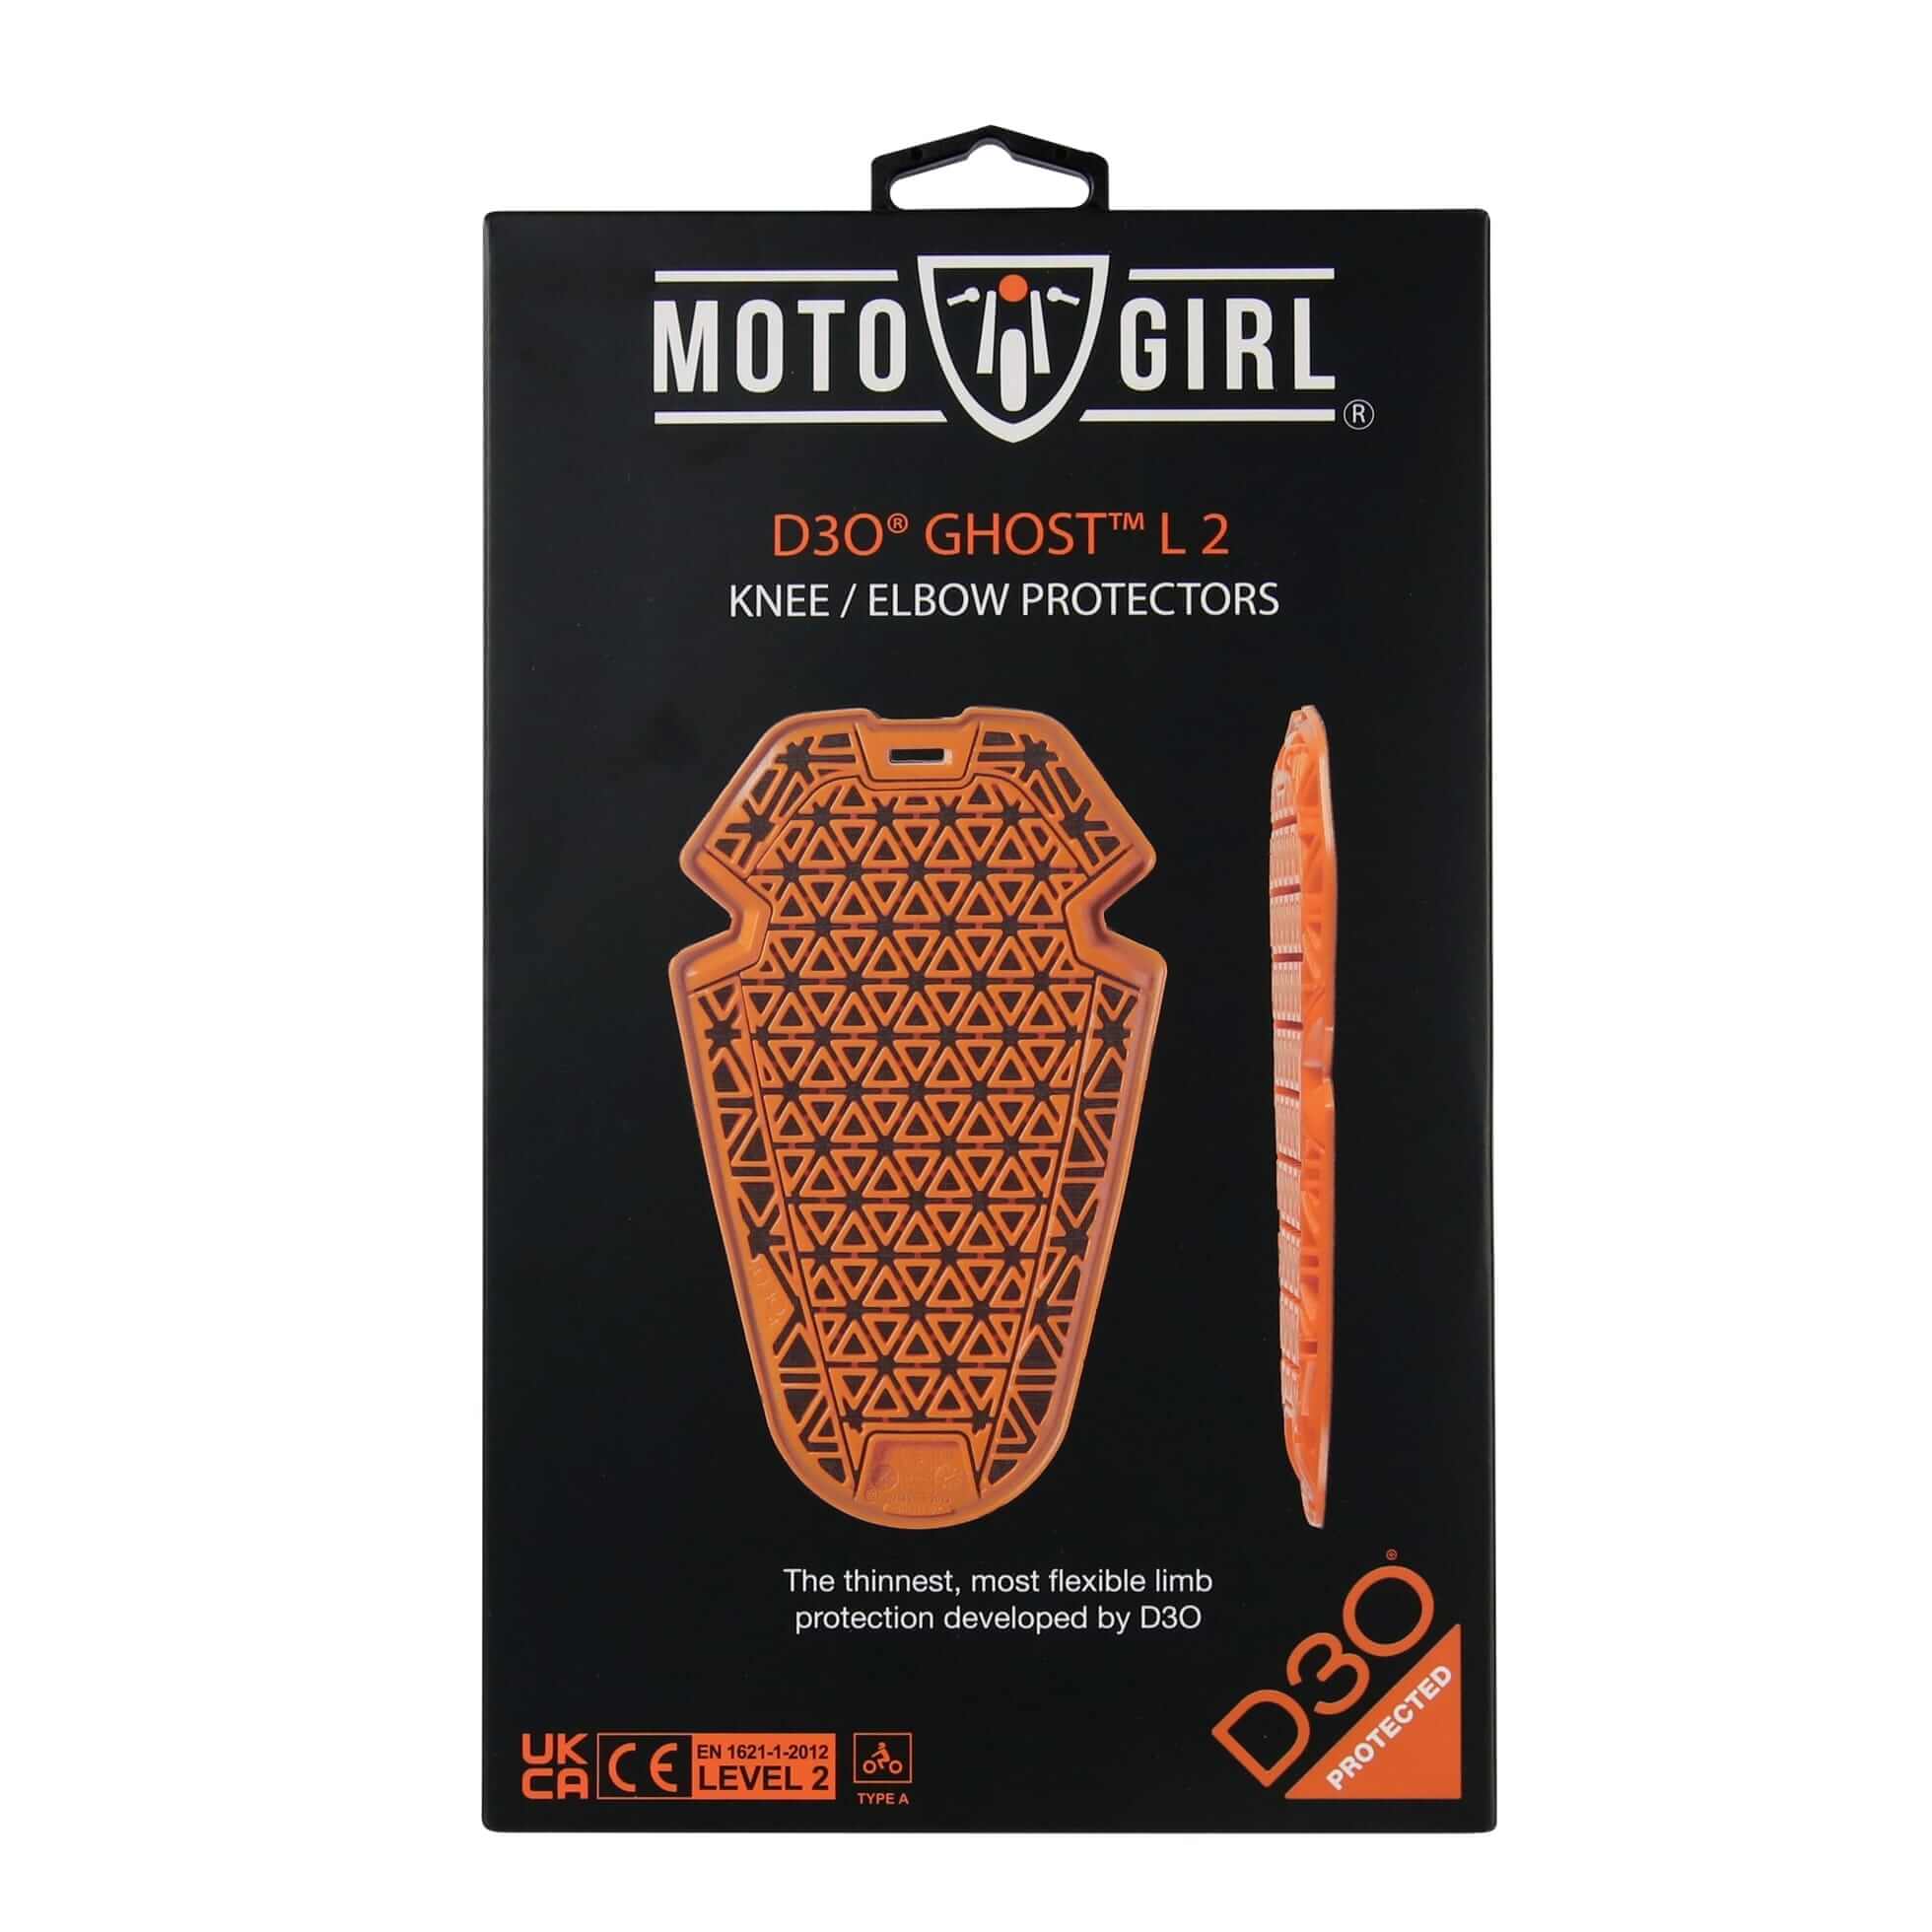 MotoGirl | CE Level 2 - D30 Ghost Knee/Elbow Armour